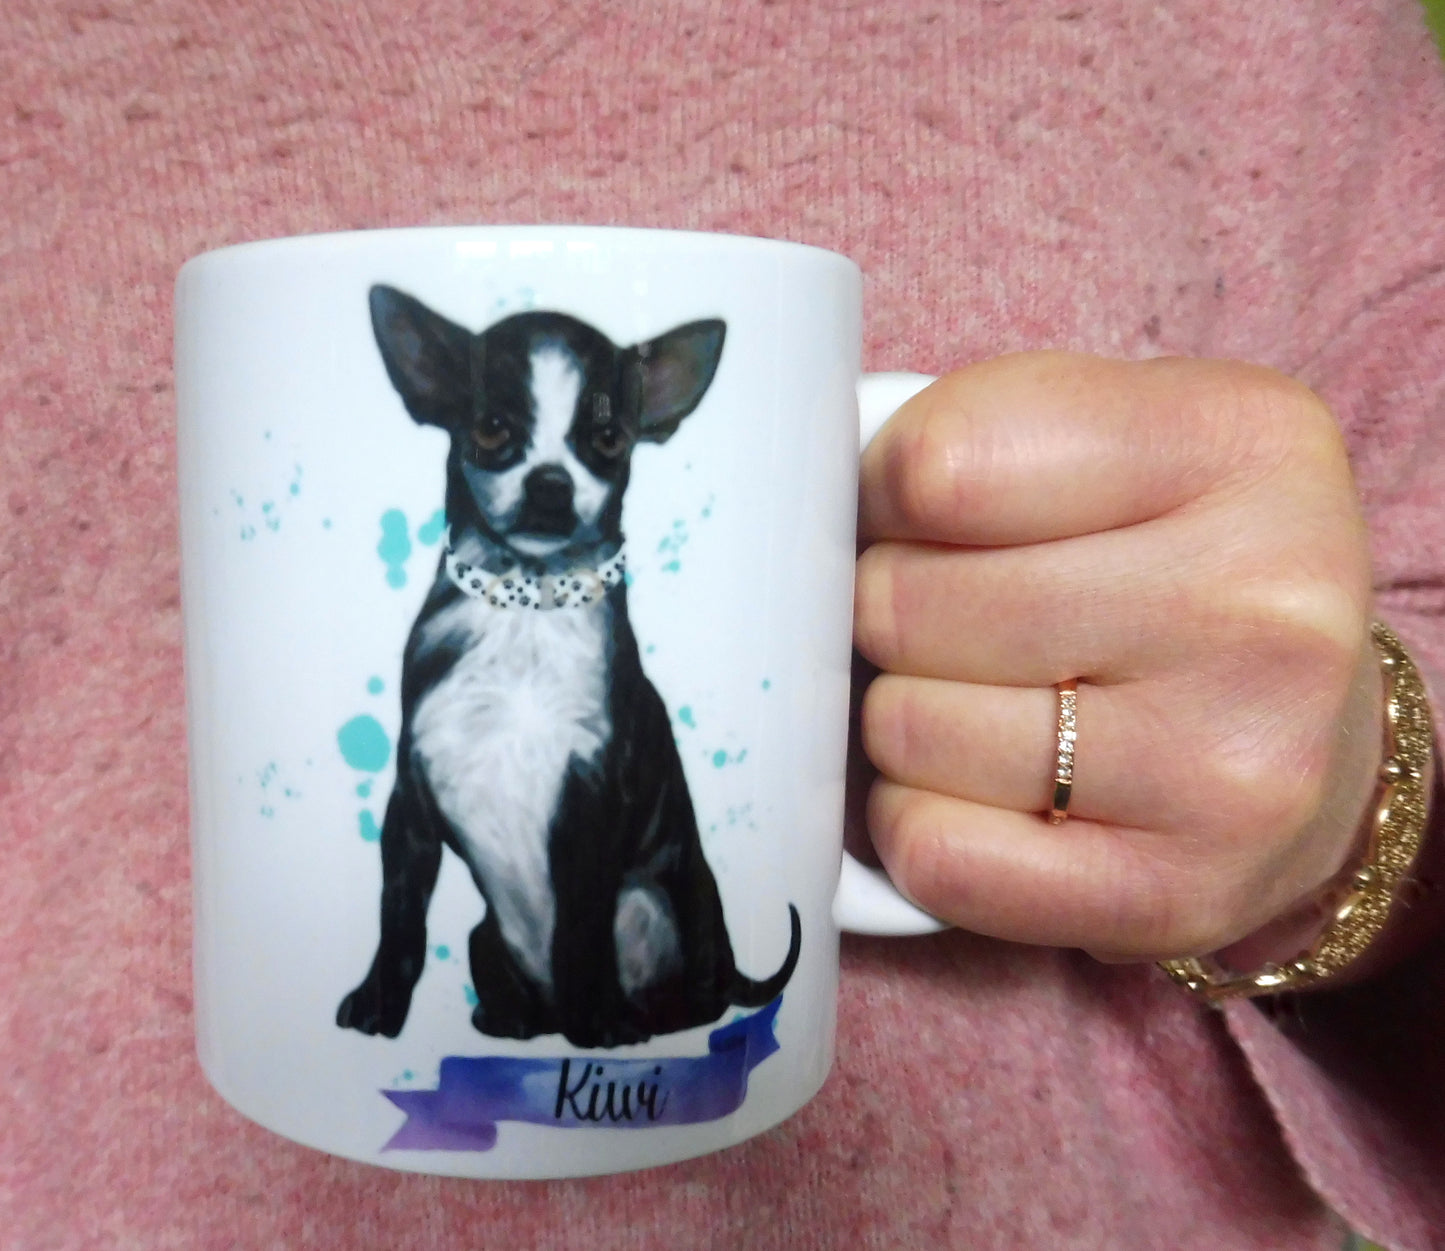 Personalized Cocker dog mug and his first name